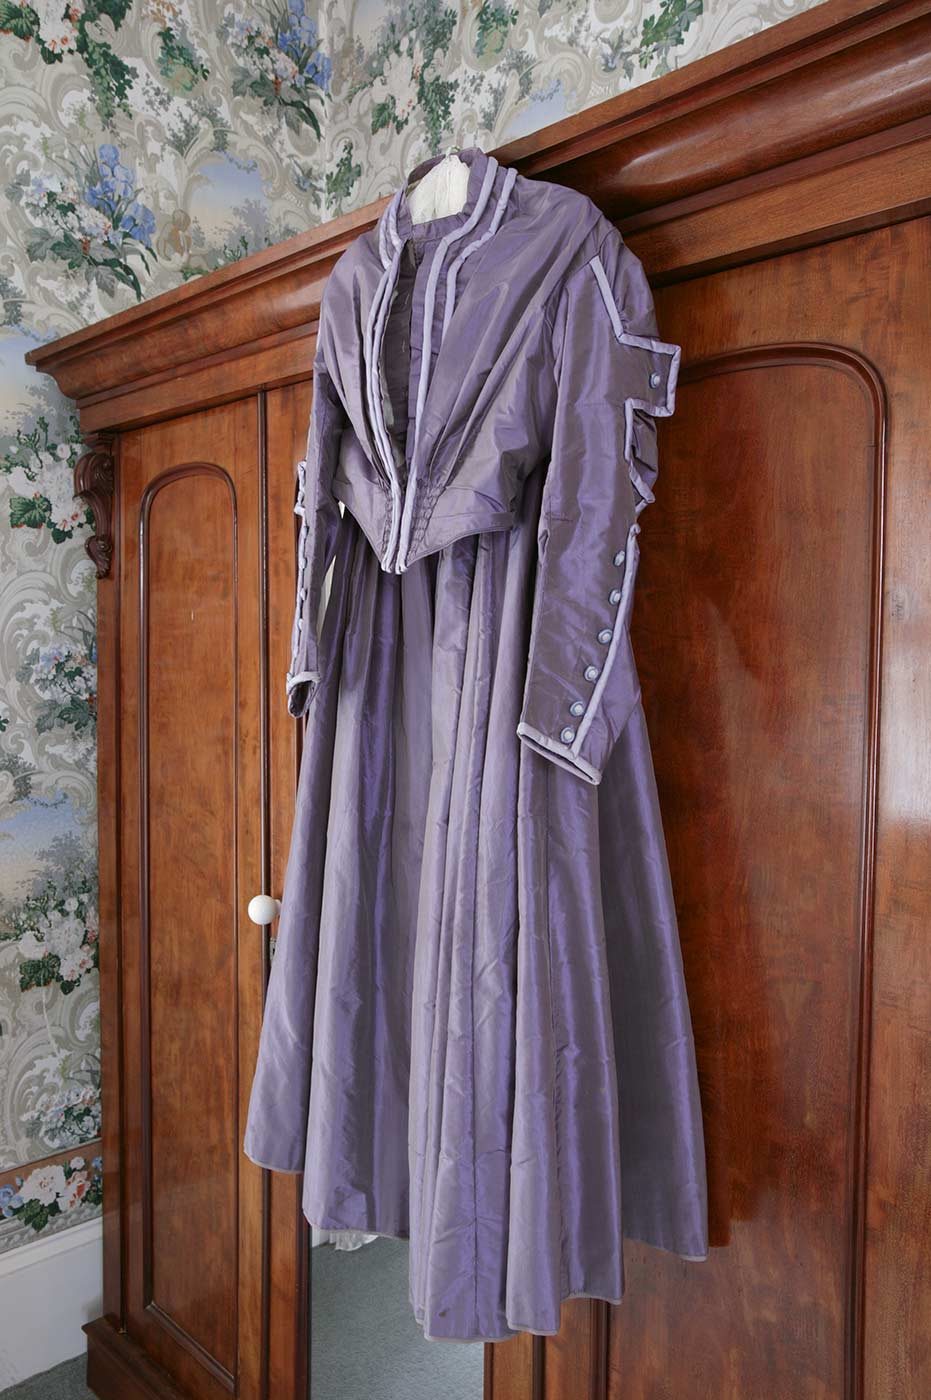 Purple period dress hanging from a wardrobe. - click to view larger image